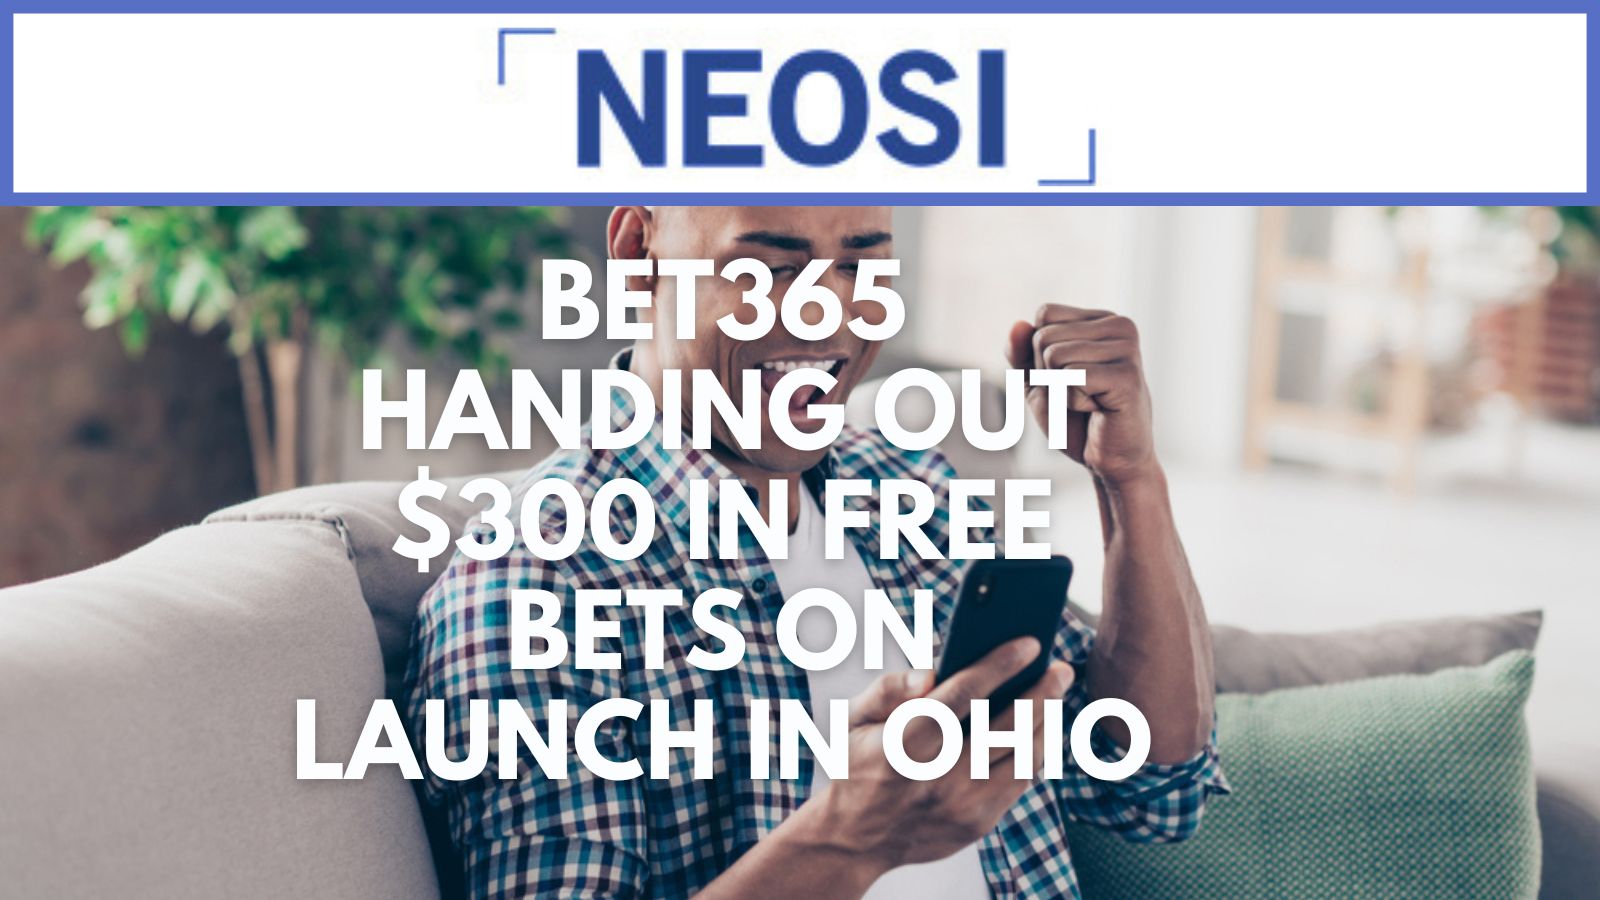 bet365 Handing Out $300 In Free Bets On Launch In Ohio